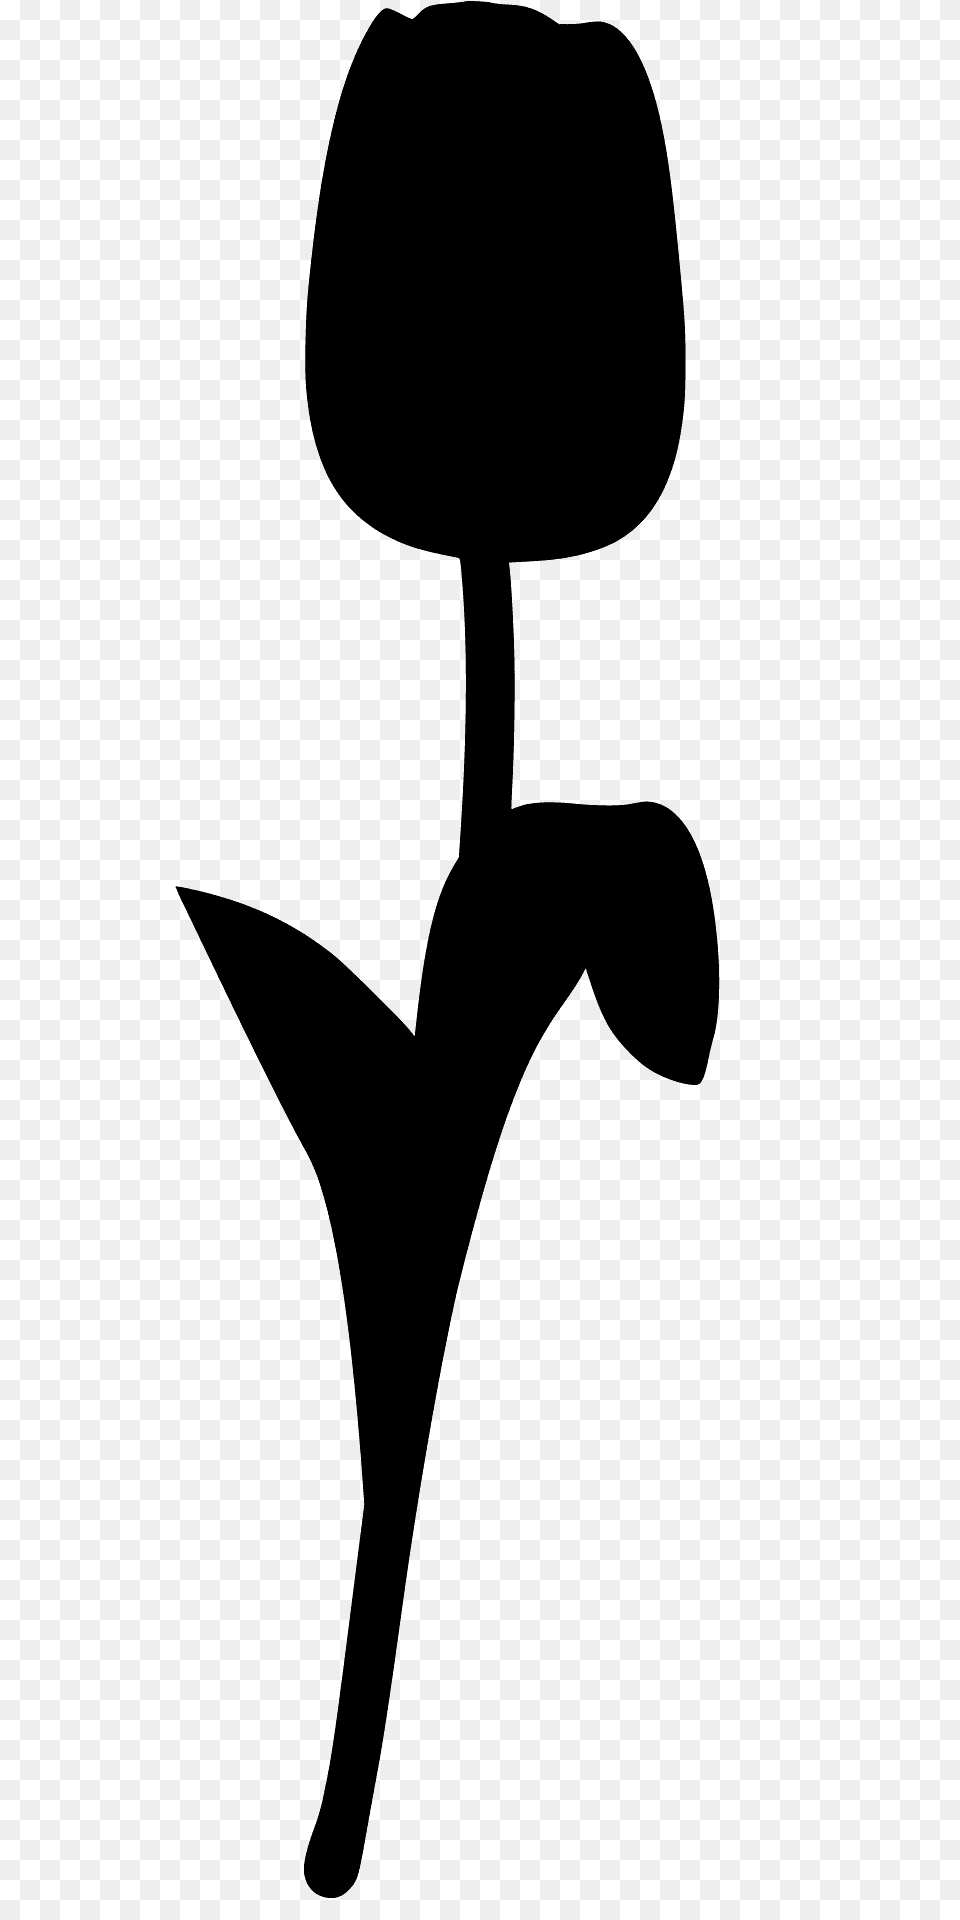 Tulip With Stem Silhouette, Cushion, Home Decor, Blade, Dagger Png Image